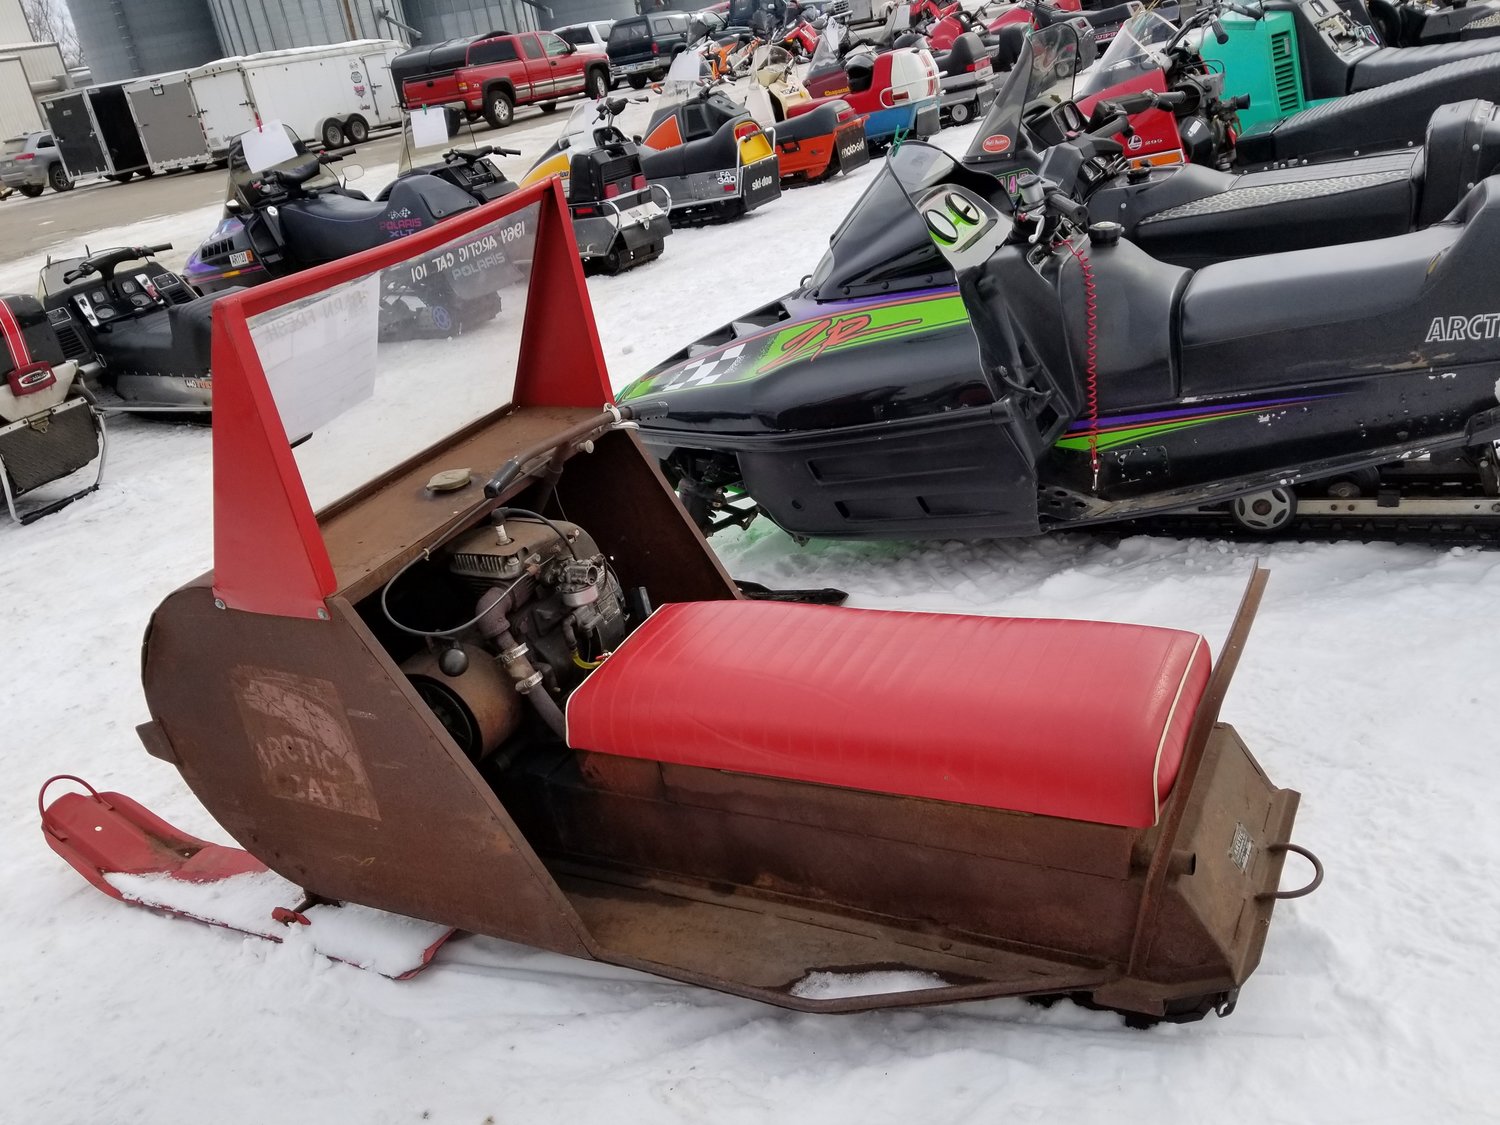 Among the oldest of the sleds on display was this 1964 Arctic Cat 101 with a 6 hp engine owned by Mark Breckenridge.